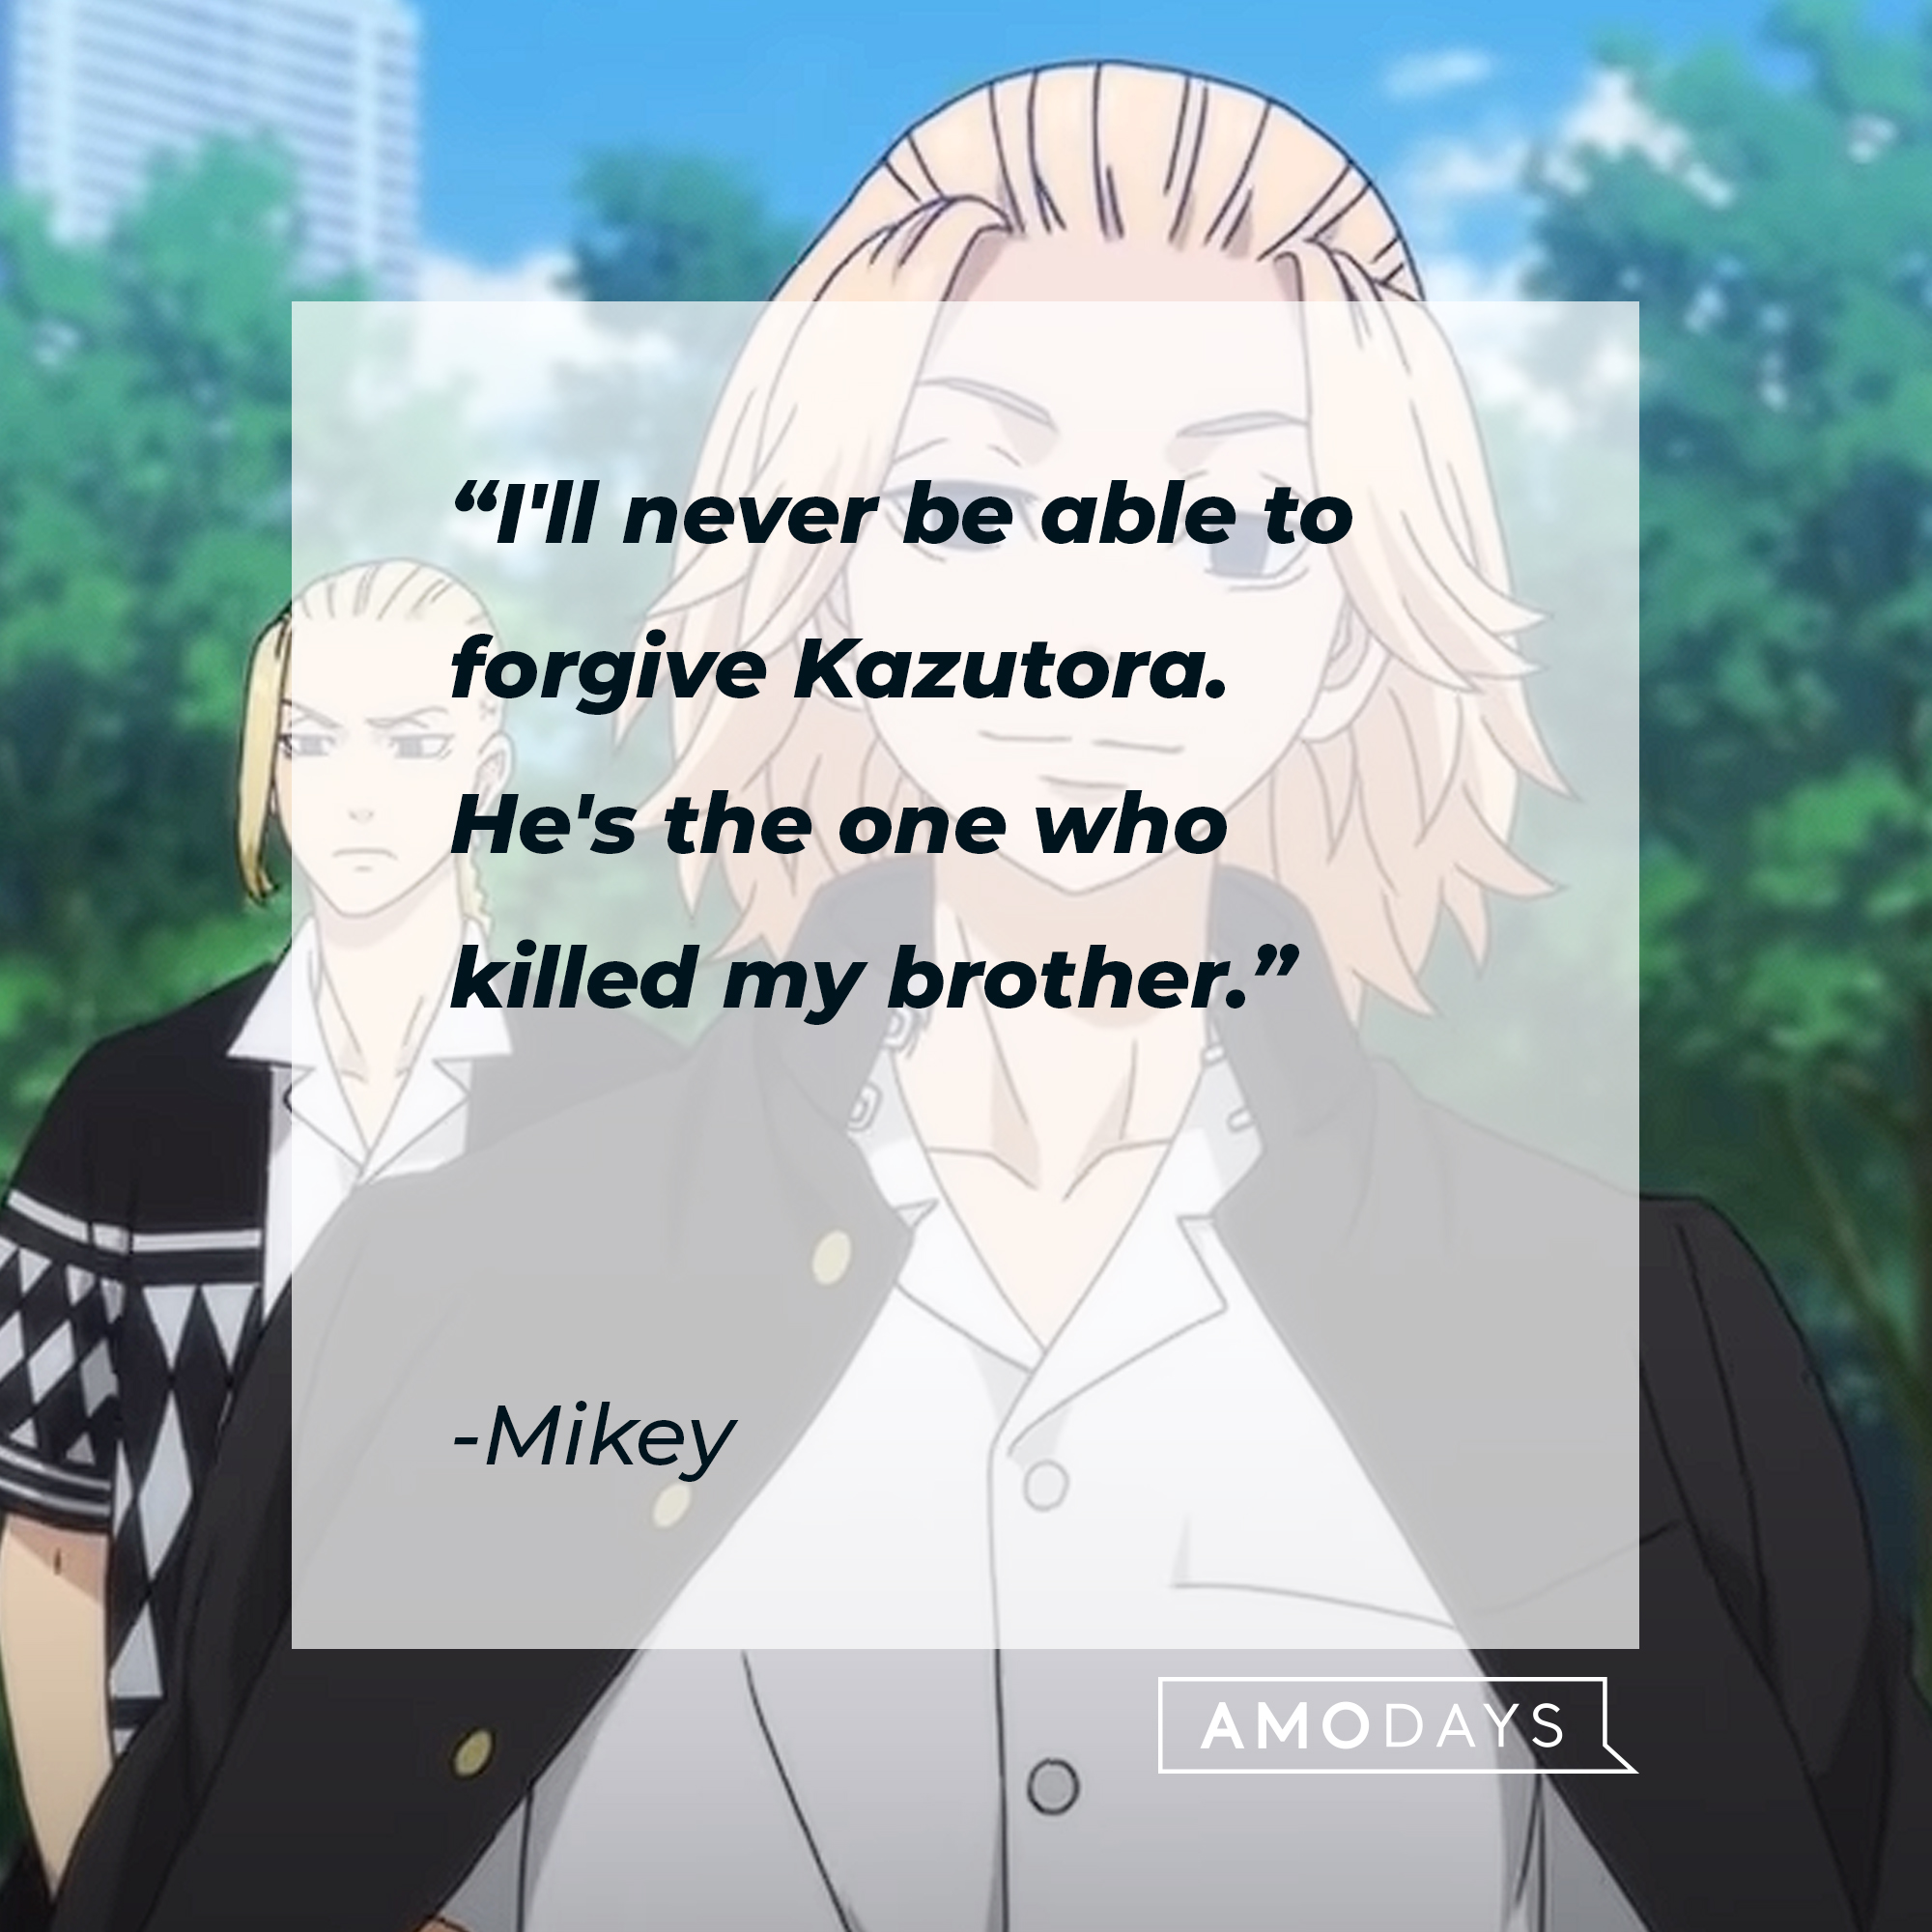 An image of Mikey and Draken with Mikey’s quote: "I'll never be able to forgive Kazutora. He's the one who killed my brother." | Source: youtube.com/CrunchyrollCollection